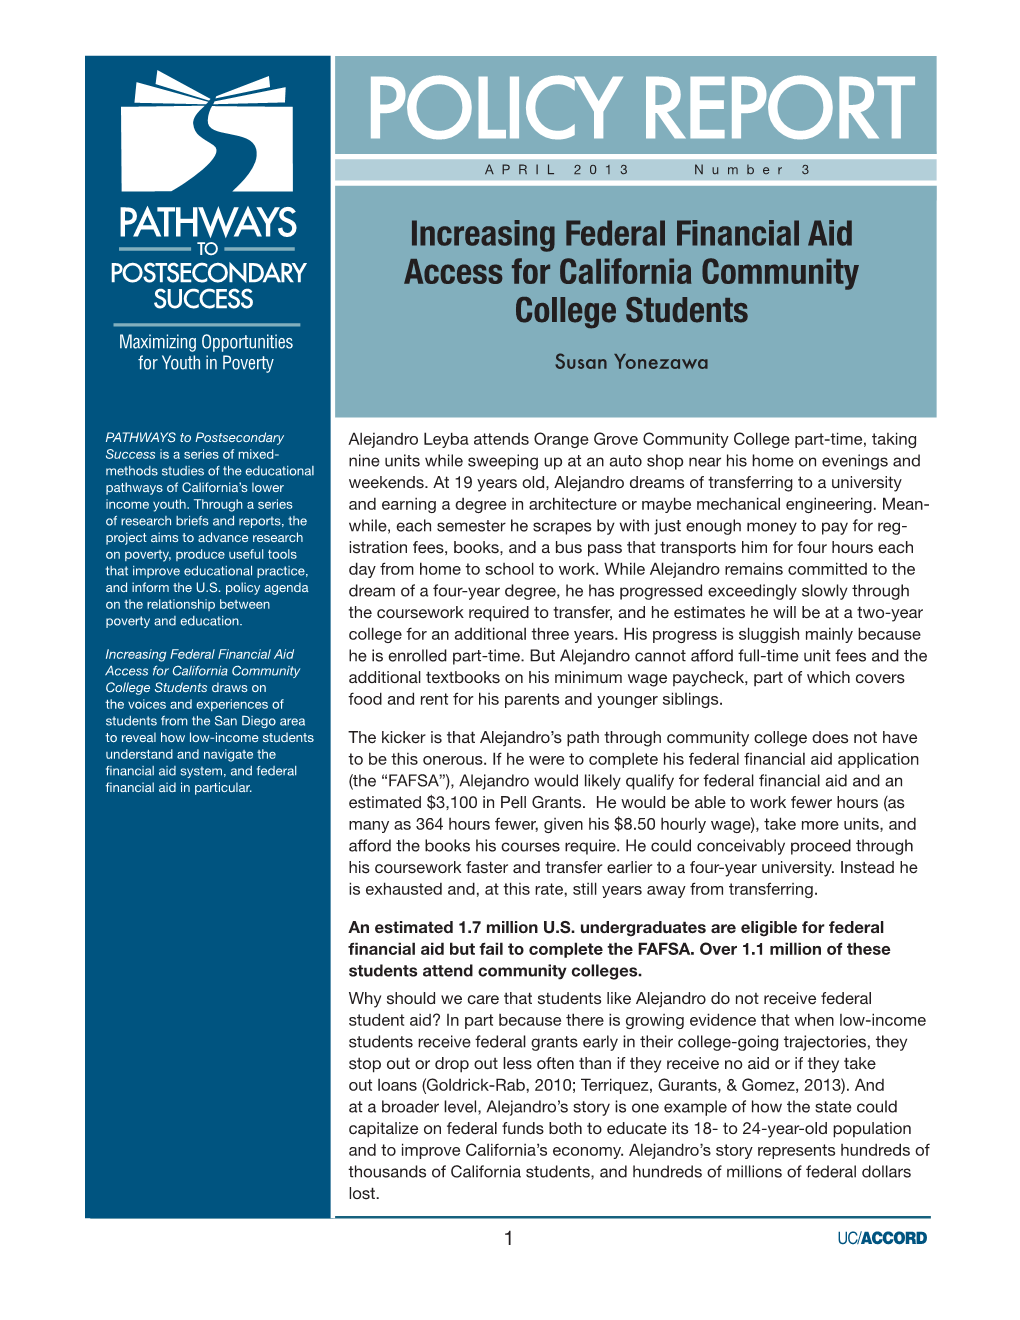 Increasing Federal Financial Aid Access for California Community College Students